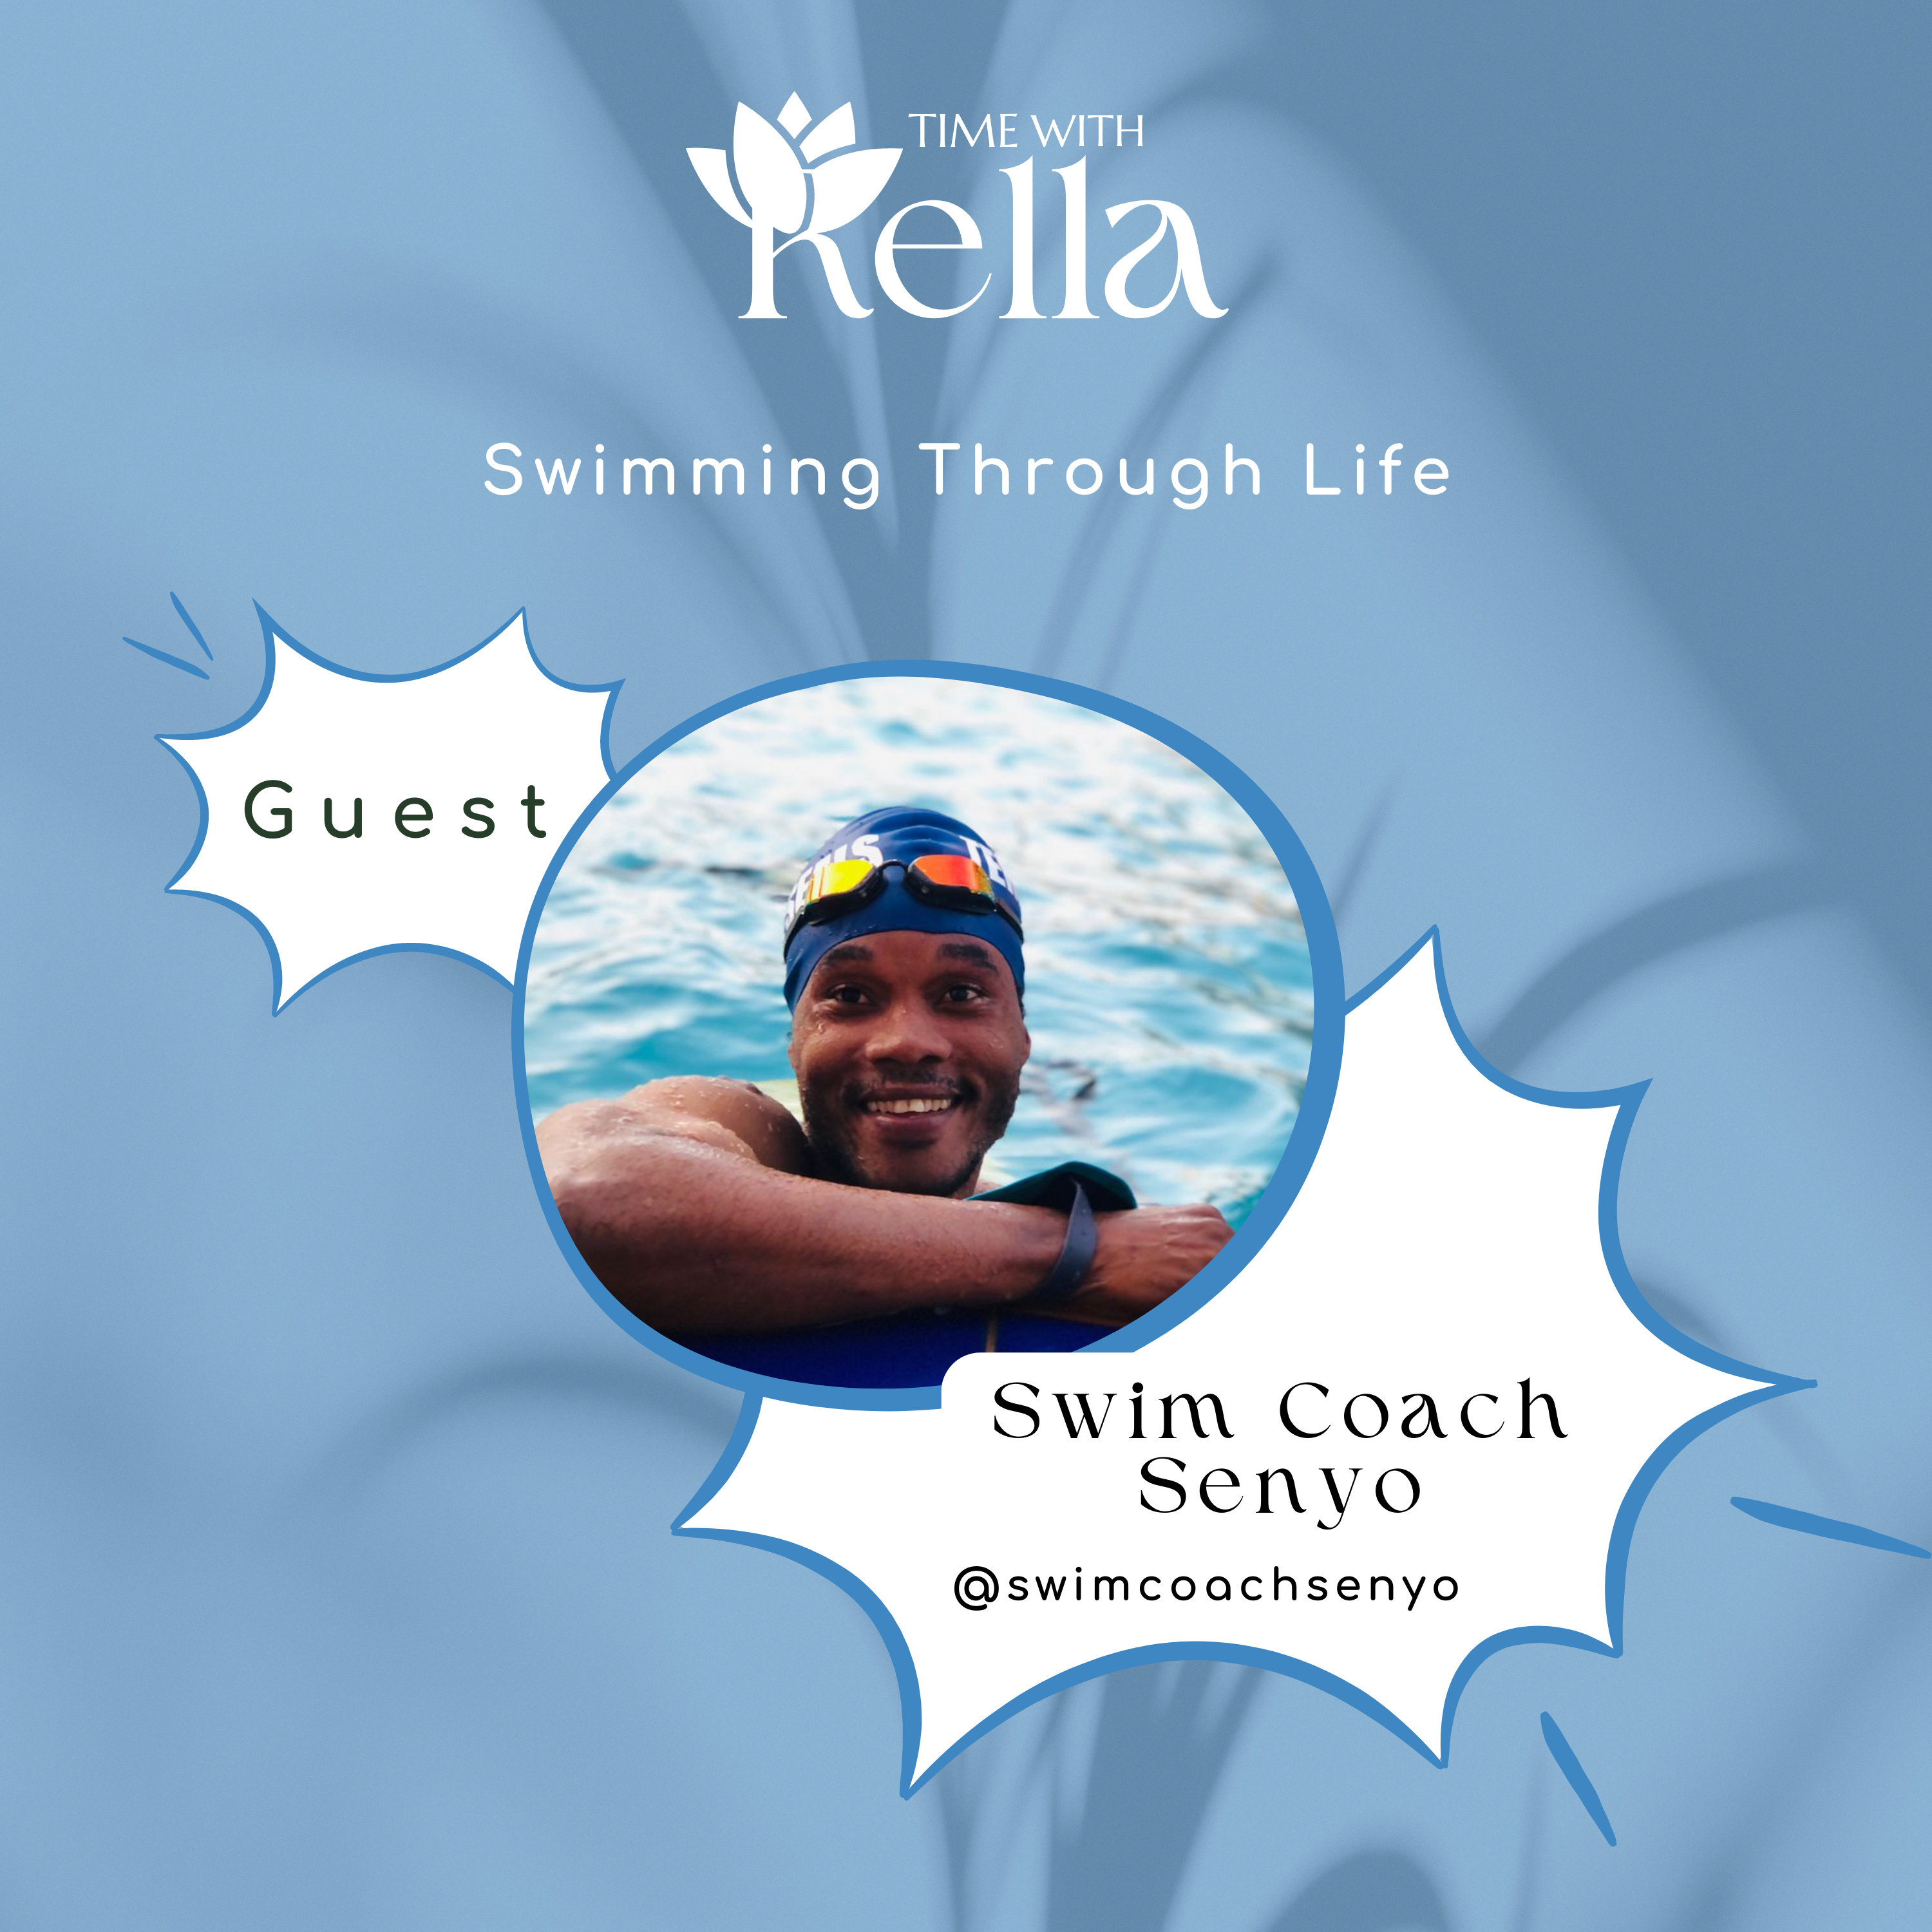 time with rella episode with Coach senyo